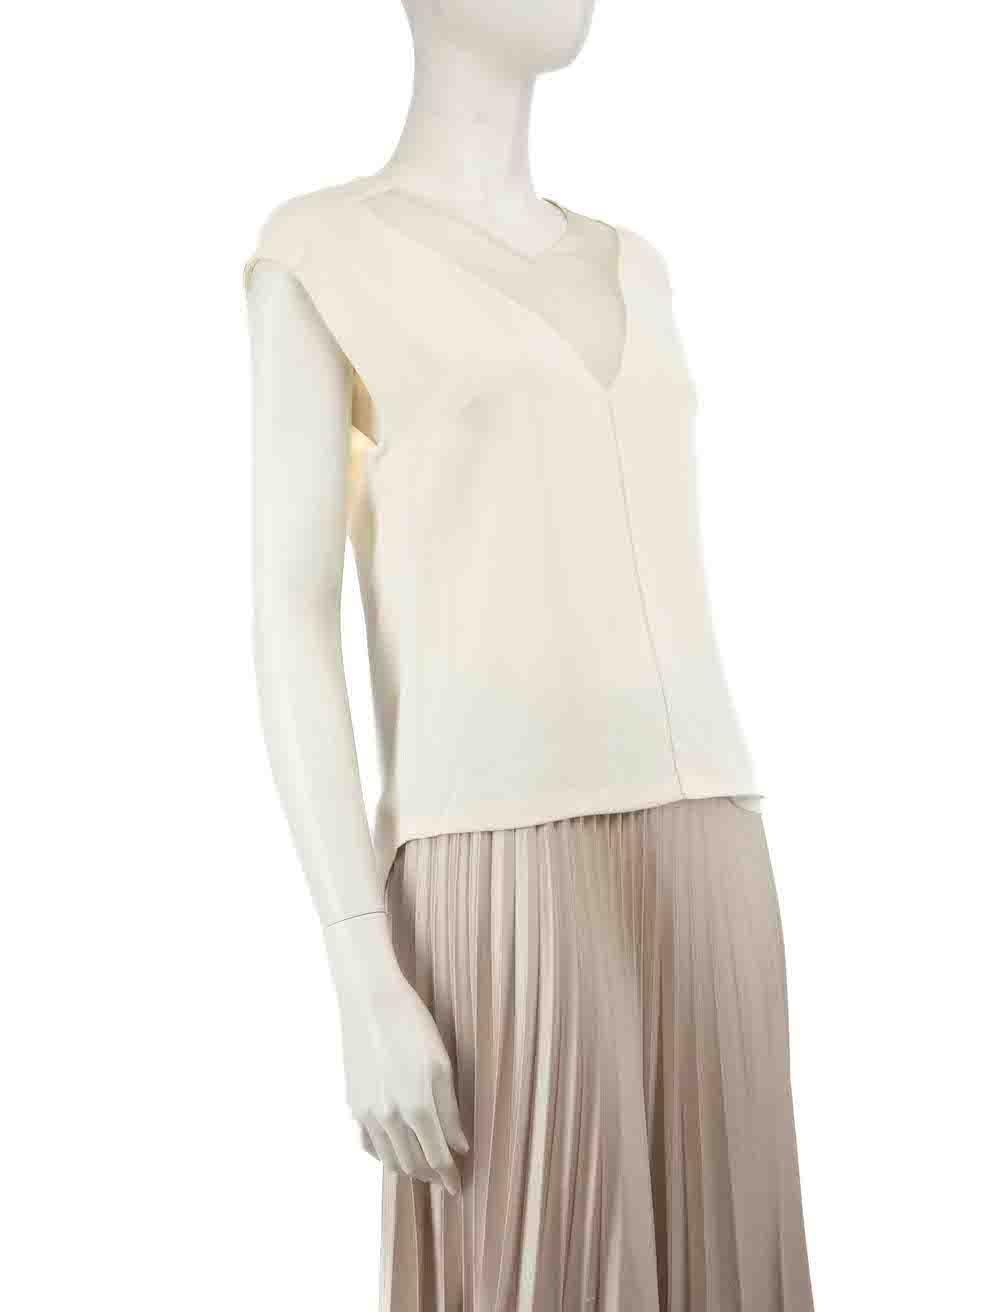 CONDITION is Good. Visible wear to top is evident. There are plucks to the weave at the shoulders and some discolouration around neckline on this used Sandro designer item.
 
 Details
 Cream
 Viscose
 Top
 Sleeveless
 Sheer neck panels
 V-neck
 
 
